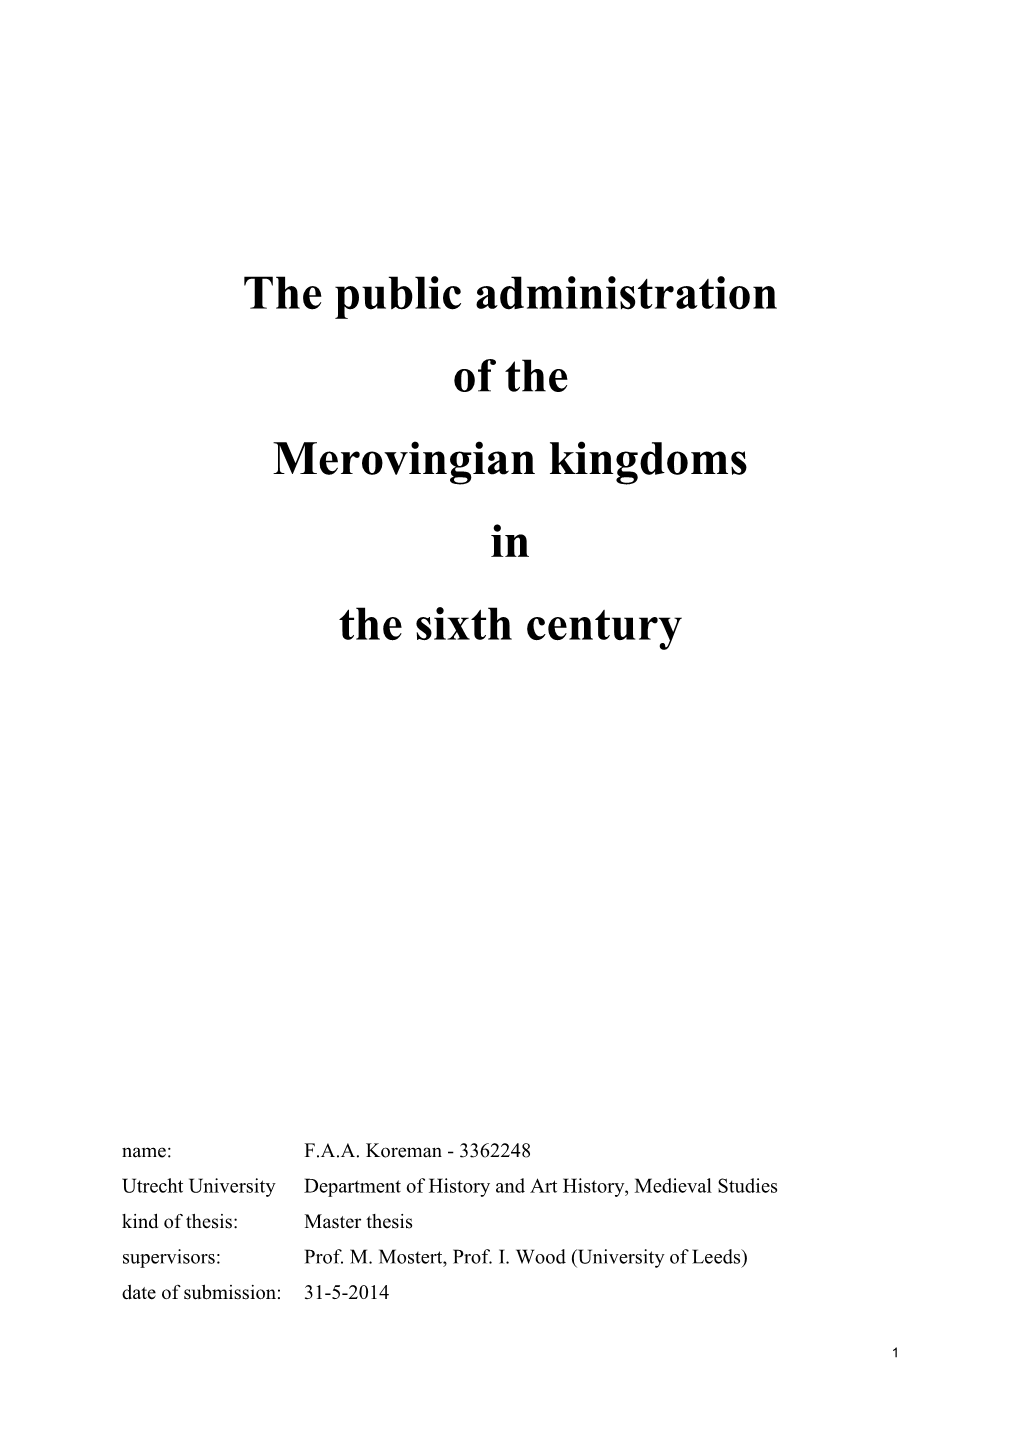 The Public Administration of the Merovingian Kingdoms in the Sixth Century